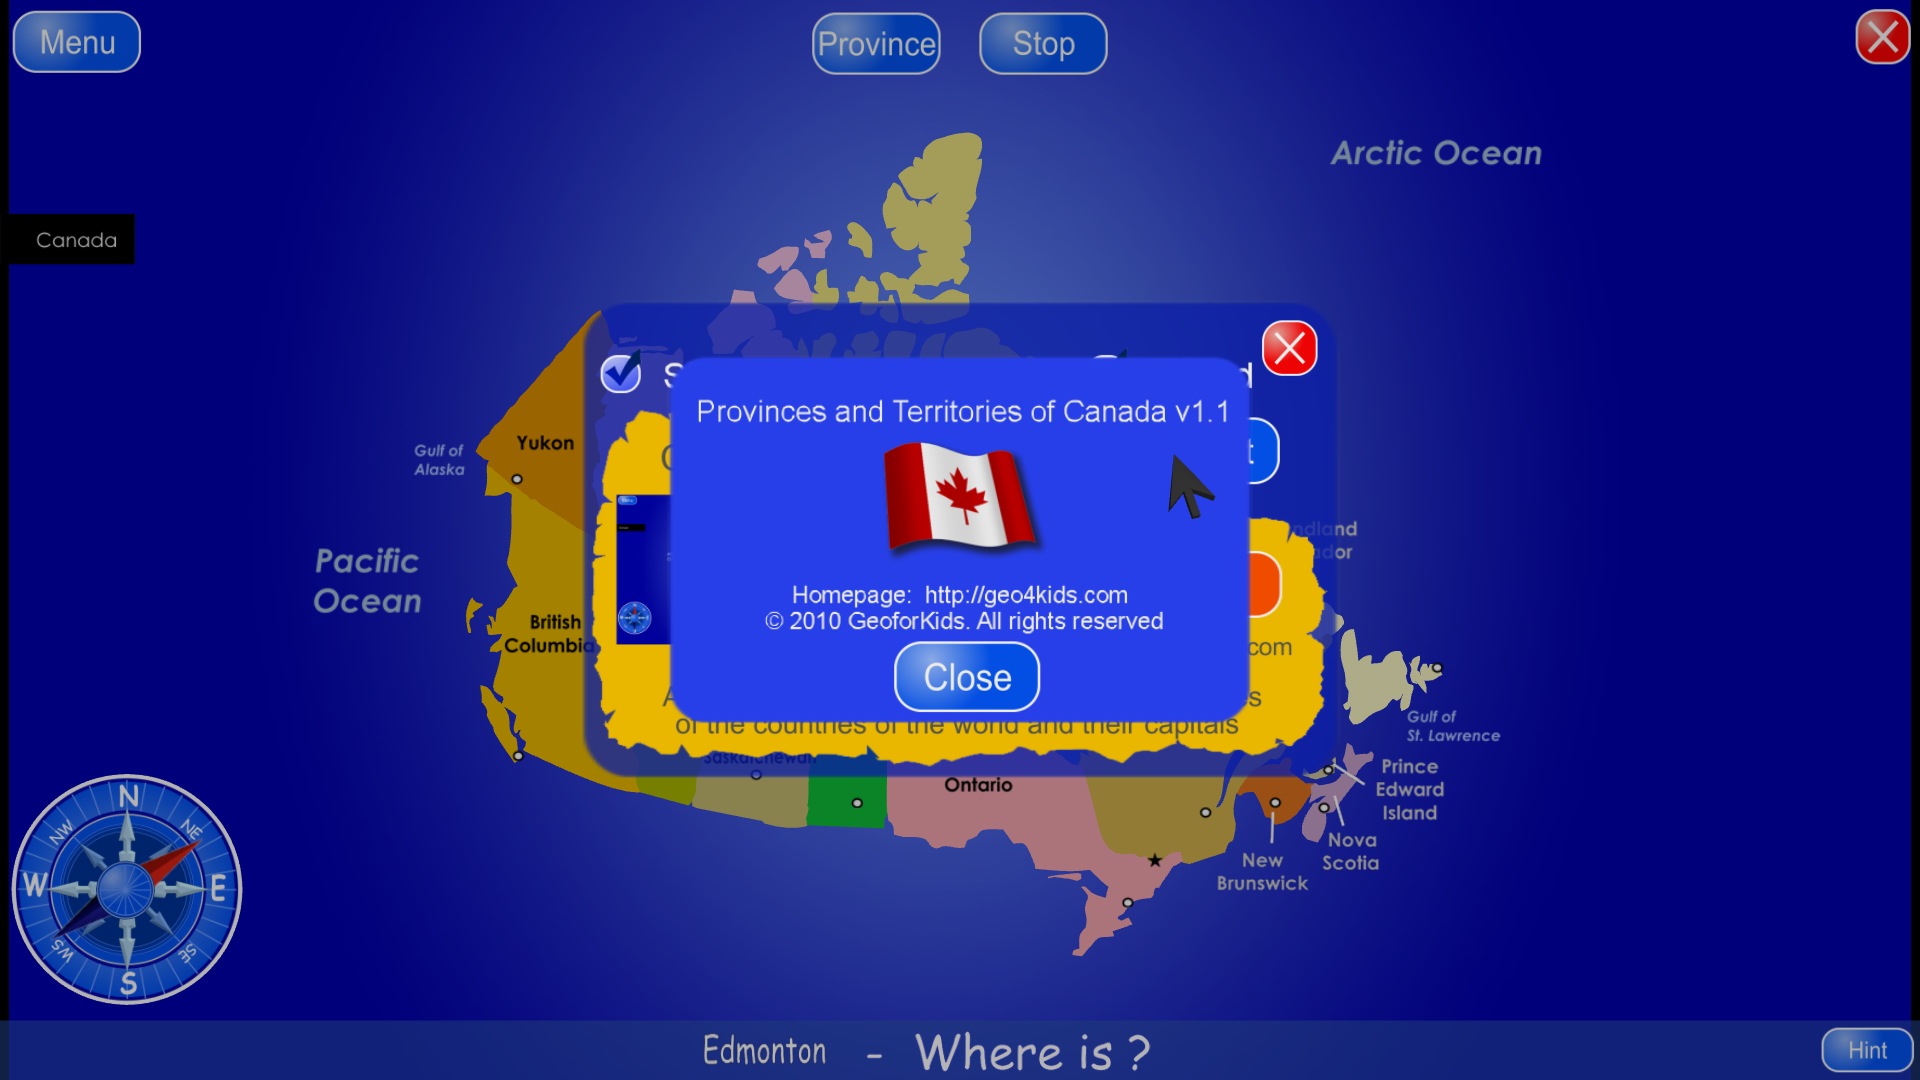 Provinces and Territories of Canada 1.1 : About